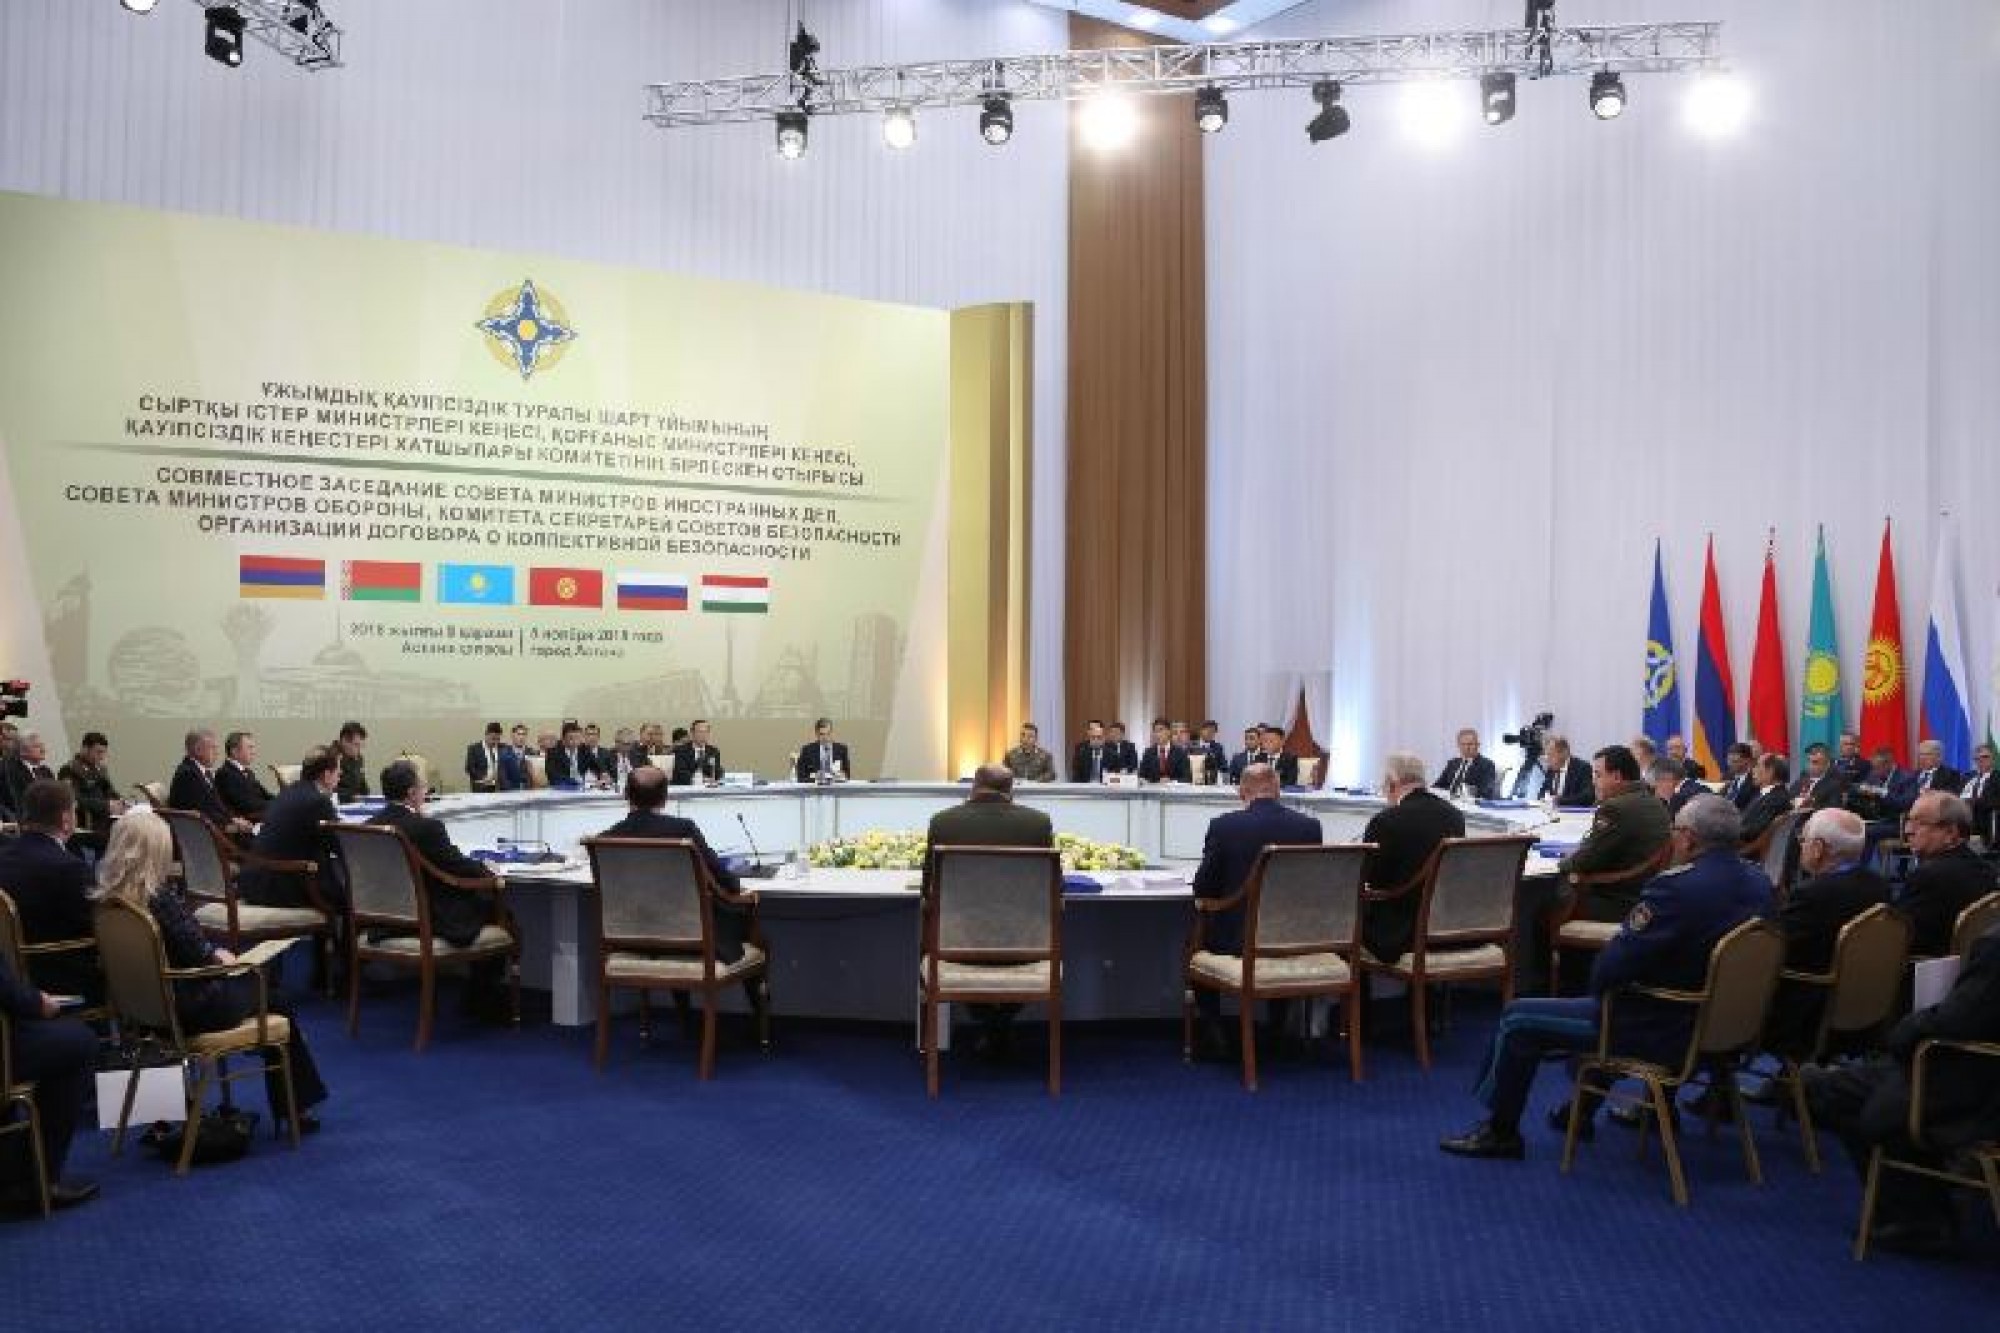 A joint meeting of the Council of Ministers of Foreign Affairs, the Council of Ministers of Defense and the Committee of Secretaries of the Security Council of the CSTO was held in Astana